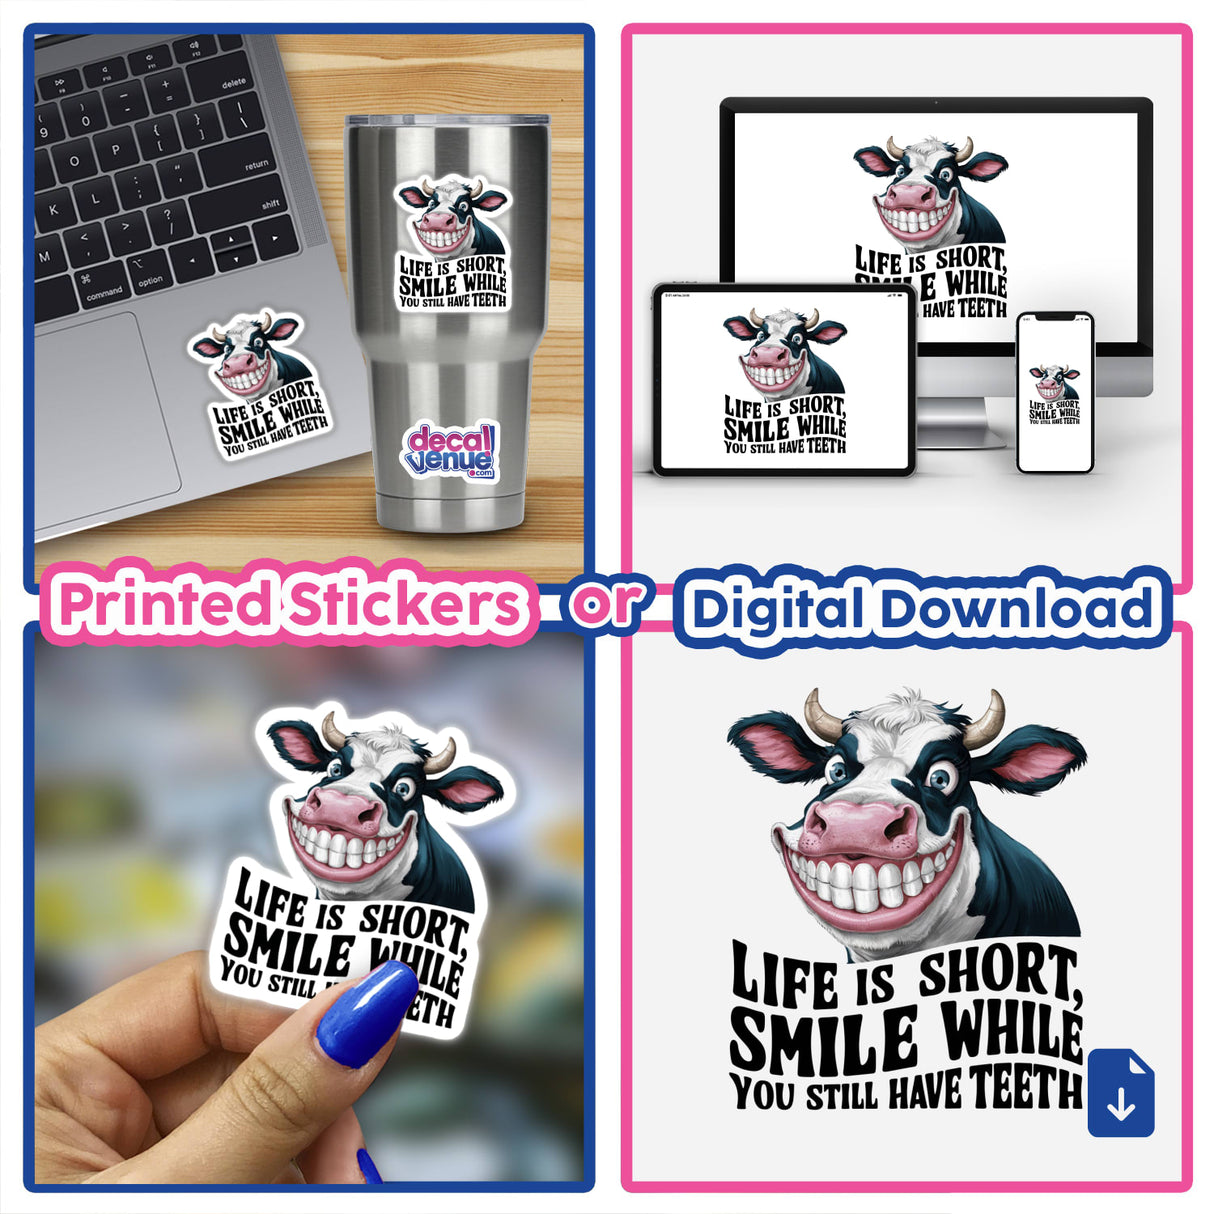 Vibrant cow graphic with humorous text: "Life is Short. Smile While You Still Have Teeth". Product displayed on various surfaces including laptop, drinking tumbler, and digital devices. Visually appealing digital artwork or printed stickers available from Decal Venue store, showcasing a whimsical cow character.